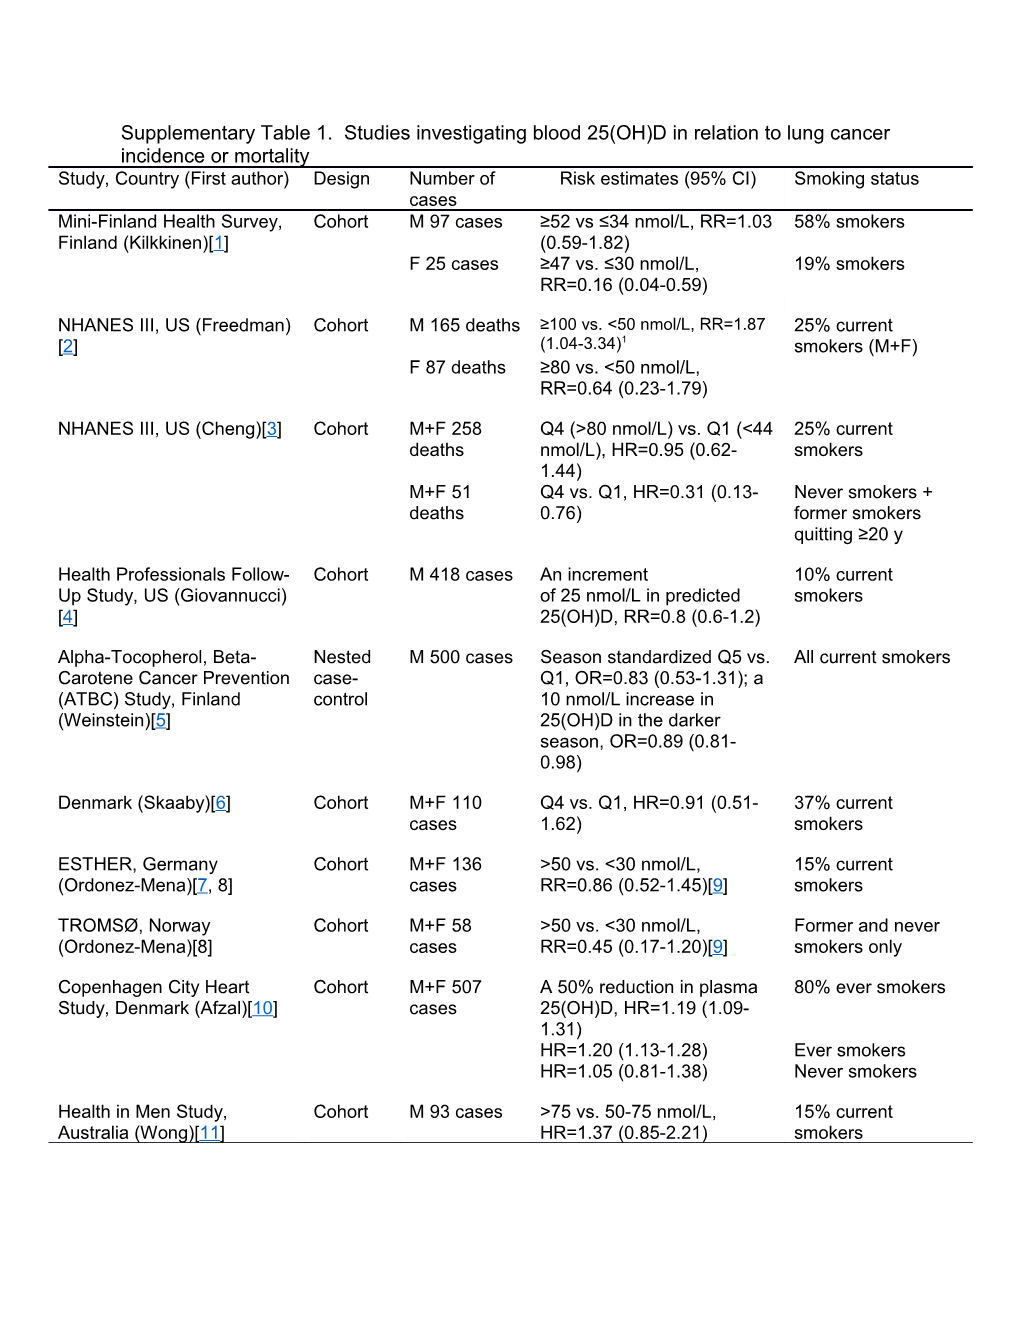 Supplementary Table 1. Studies Investigating Blood 25(OH)D in Relation to Lung Cancer Incidence